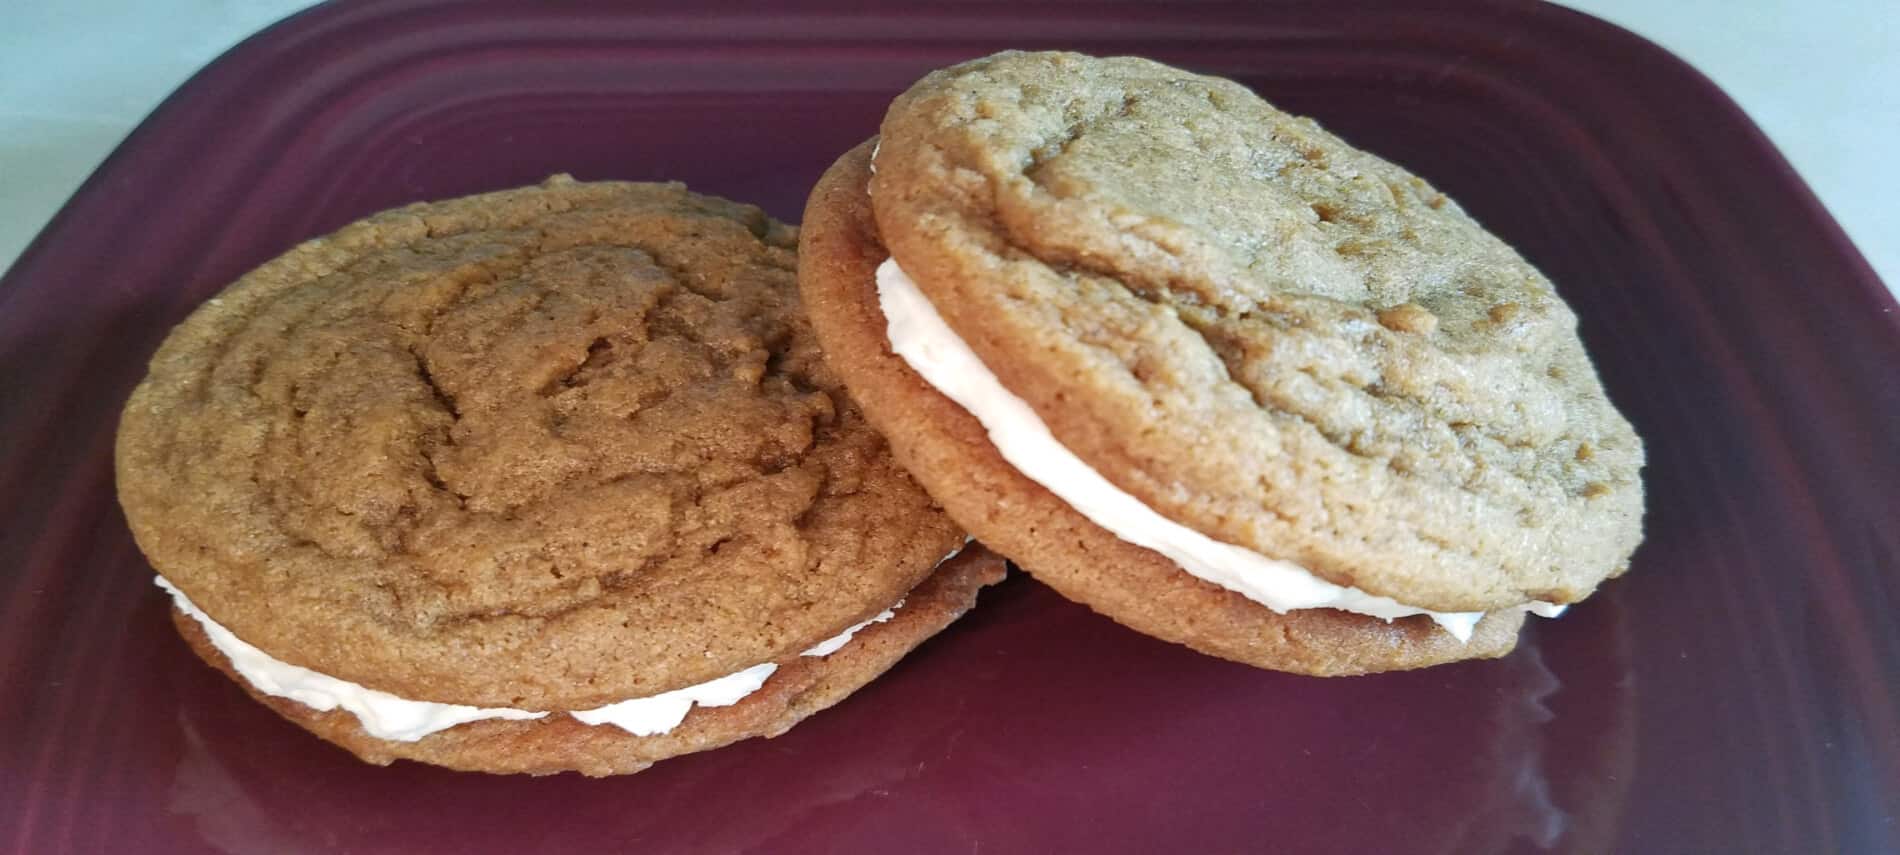 ginger molasses sandwich cookies with cream filling on burgundy plate